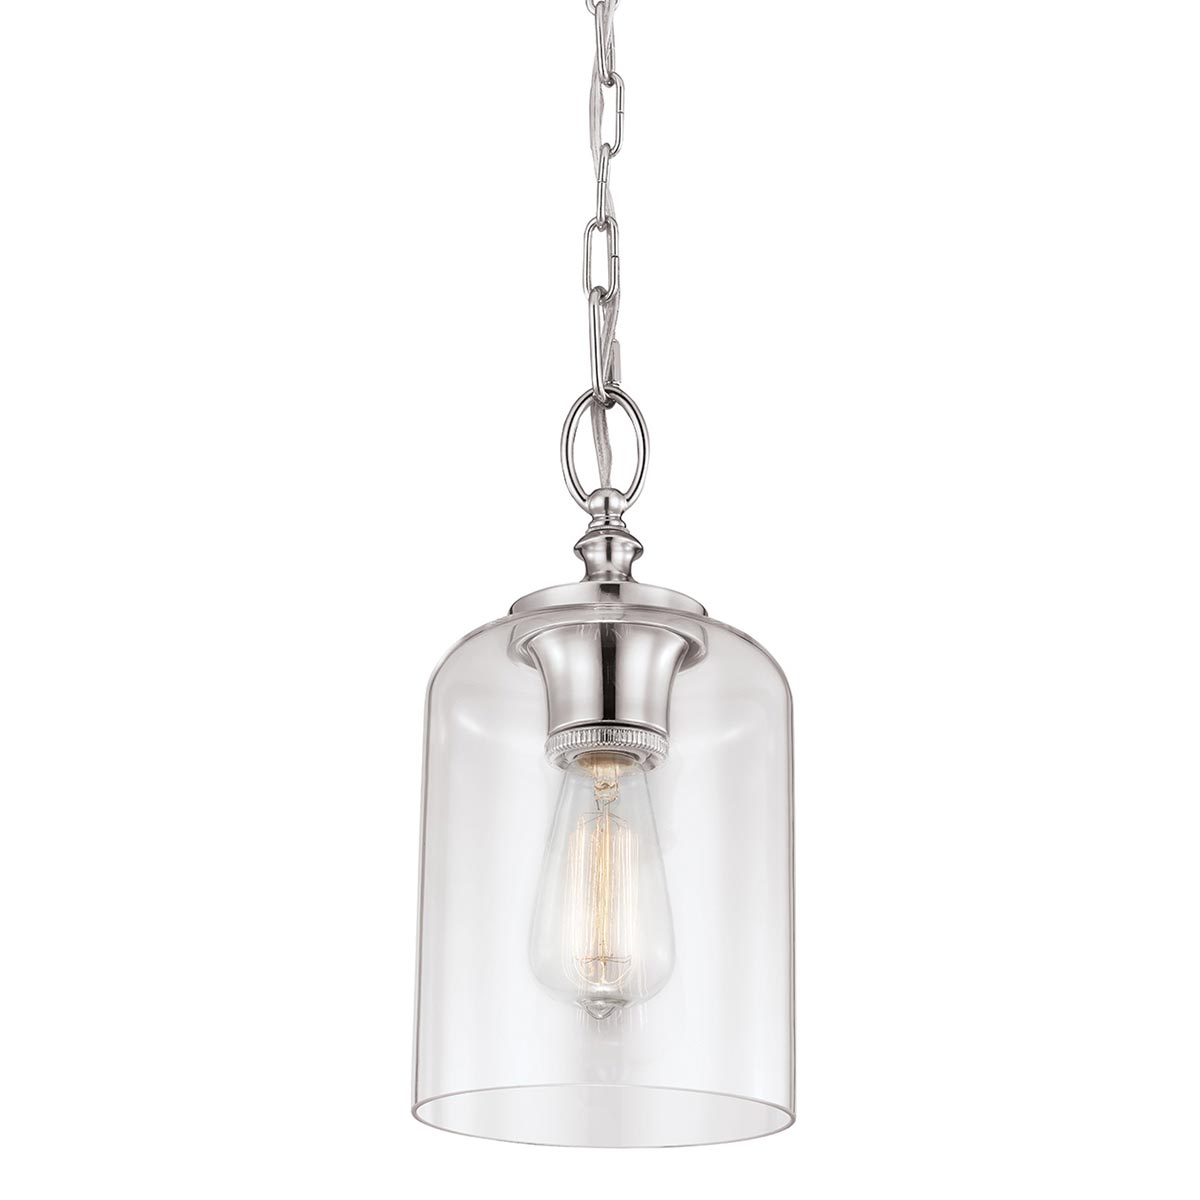 Feiss Hounslow Polished Nickel 1 Light Mini Pendant With Clear Glass